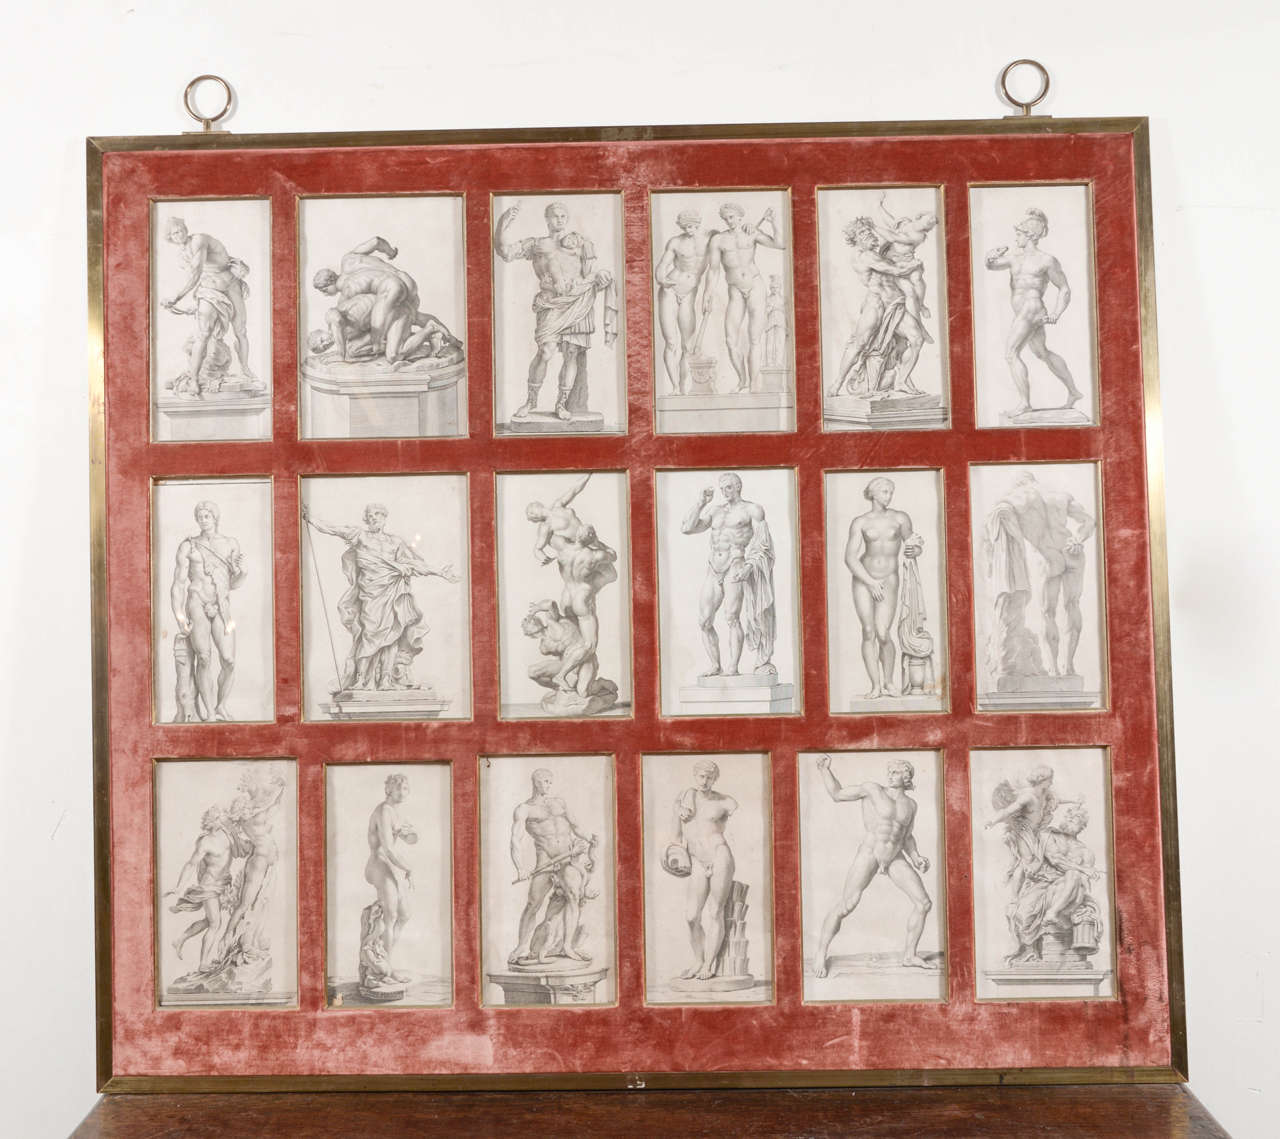 19th century lithograph sketches taken of statues from famous artists, framed under glass on red velvet wrapped brass frame. One of a kind and fabulous !